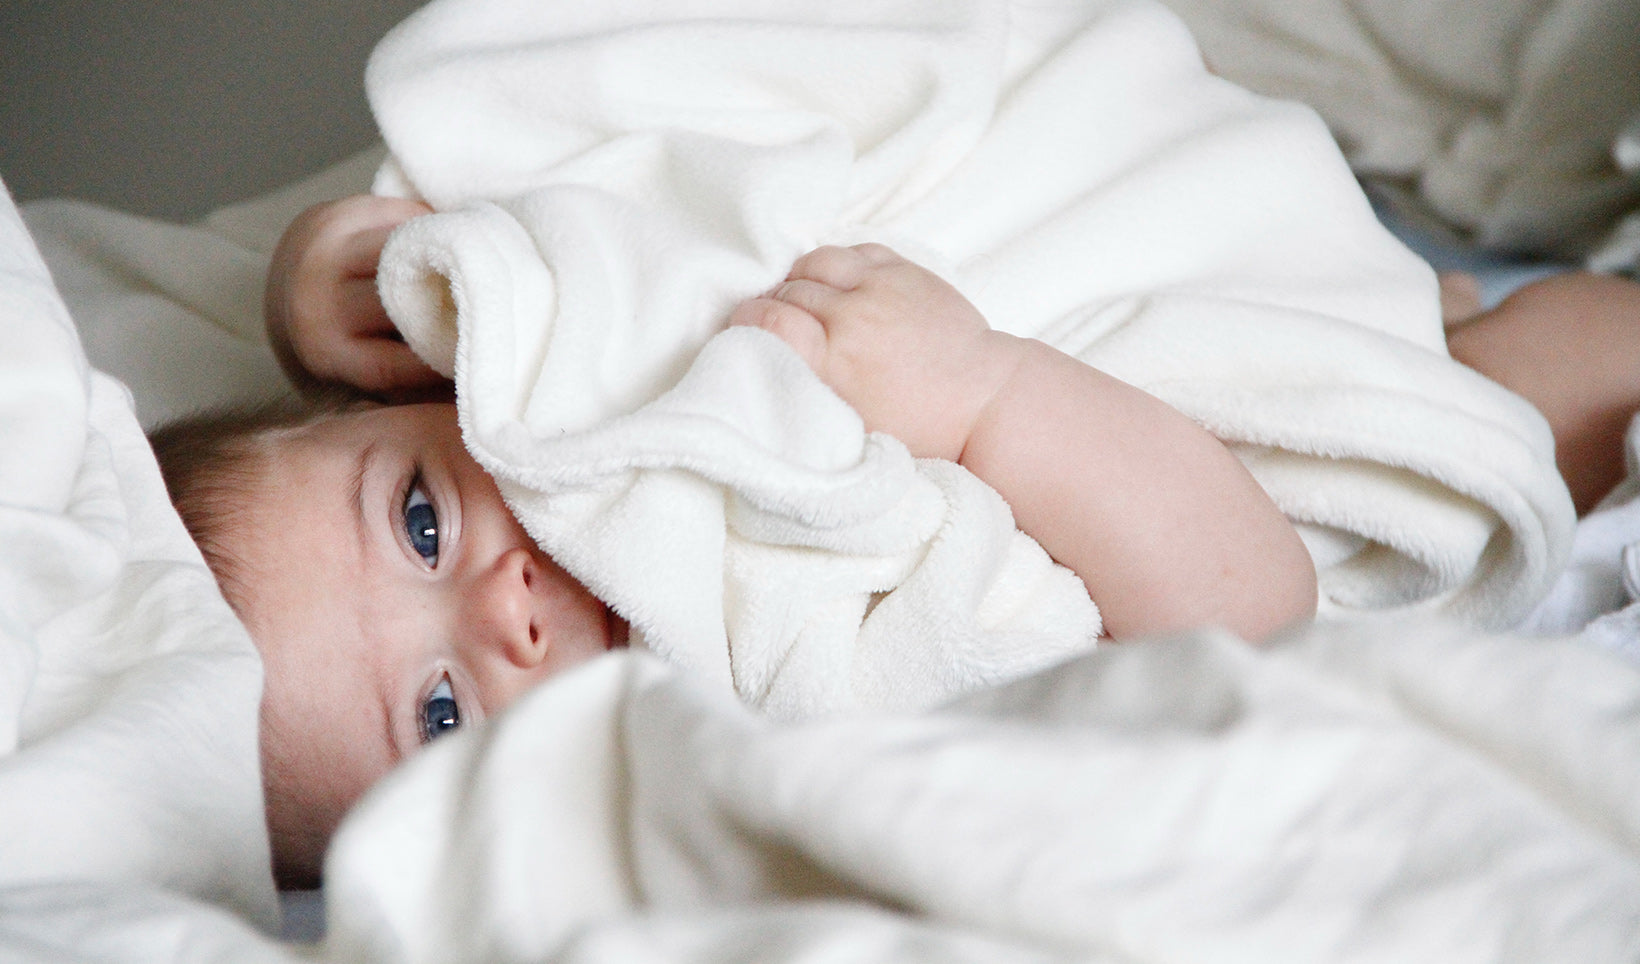 3 key points to help your baby have a safe, restful sleep